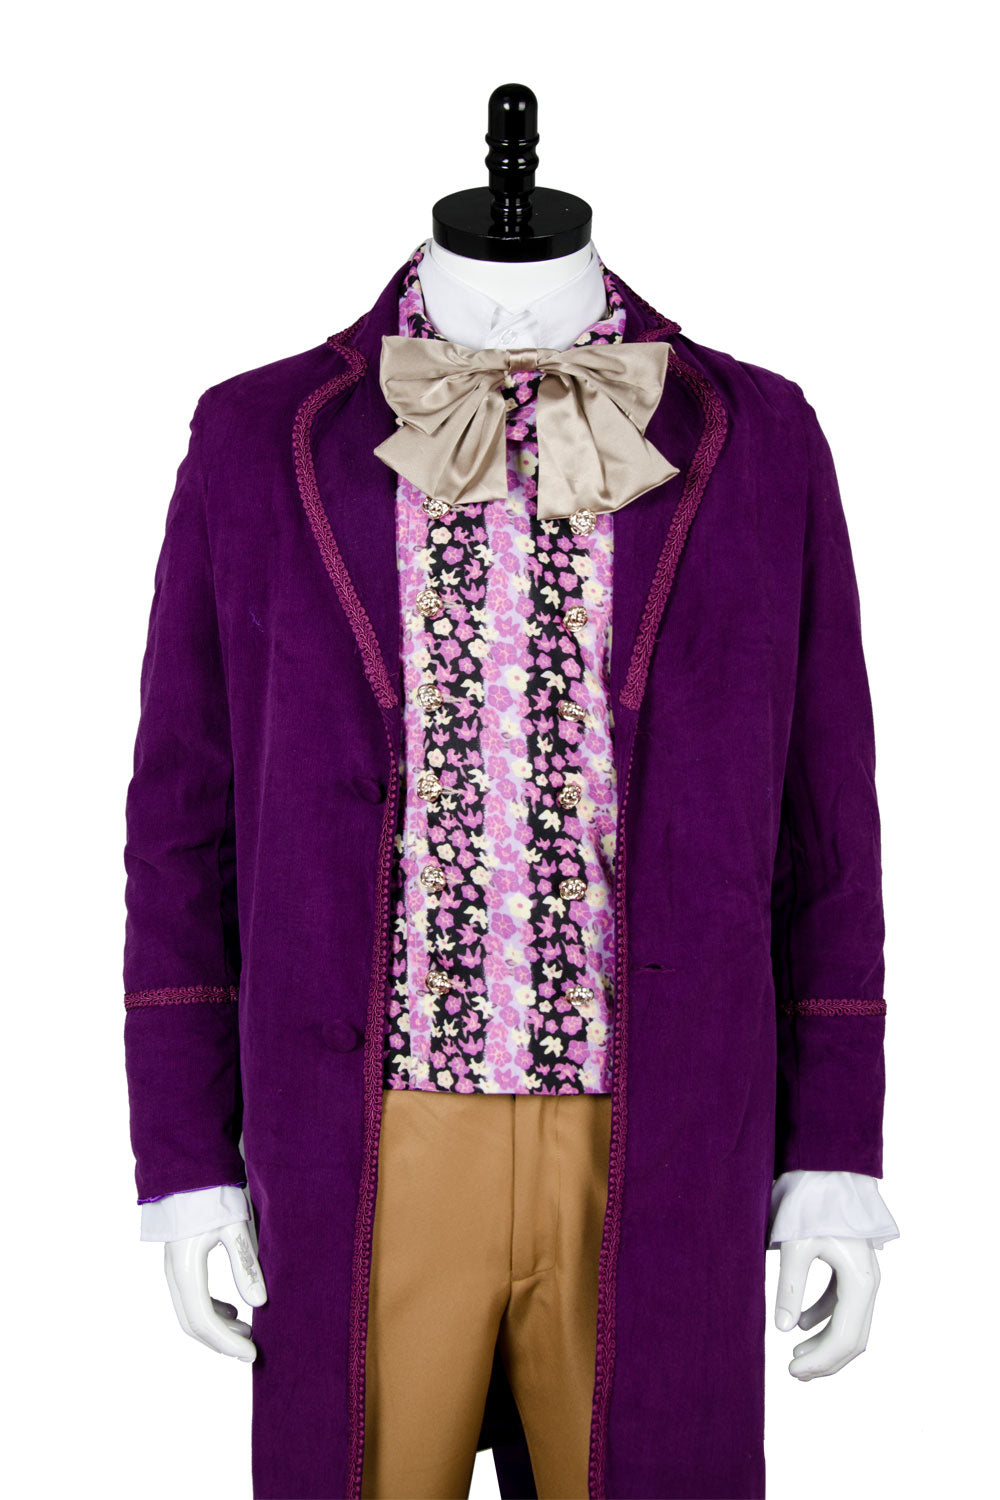 SeeCospaly Willy Wonka and the Chocolate Factory 1971 Willy Wonka Outfits Cosplay Costume